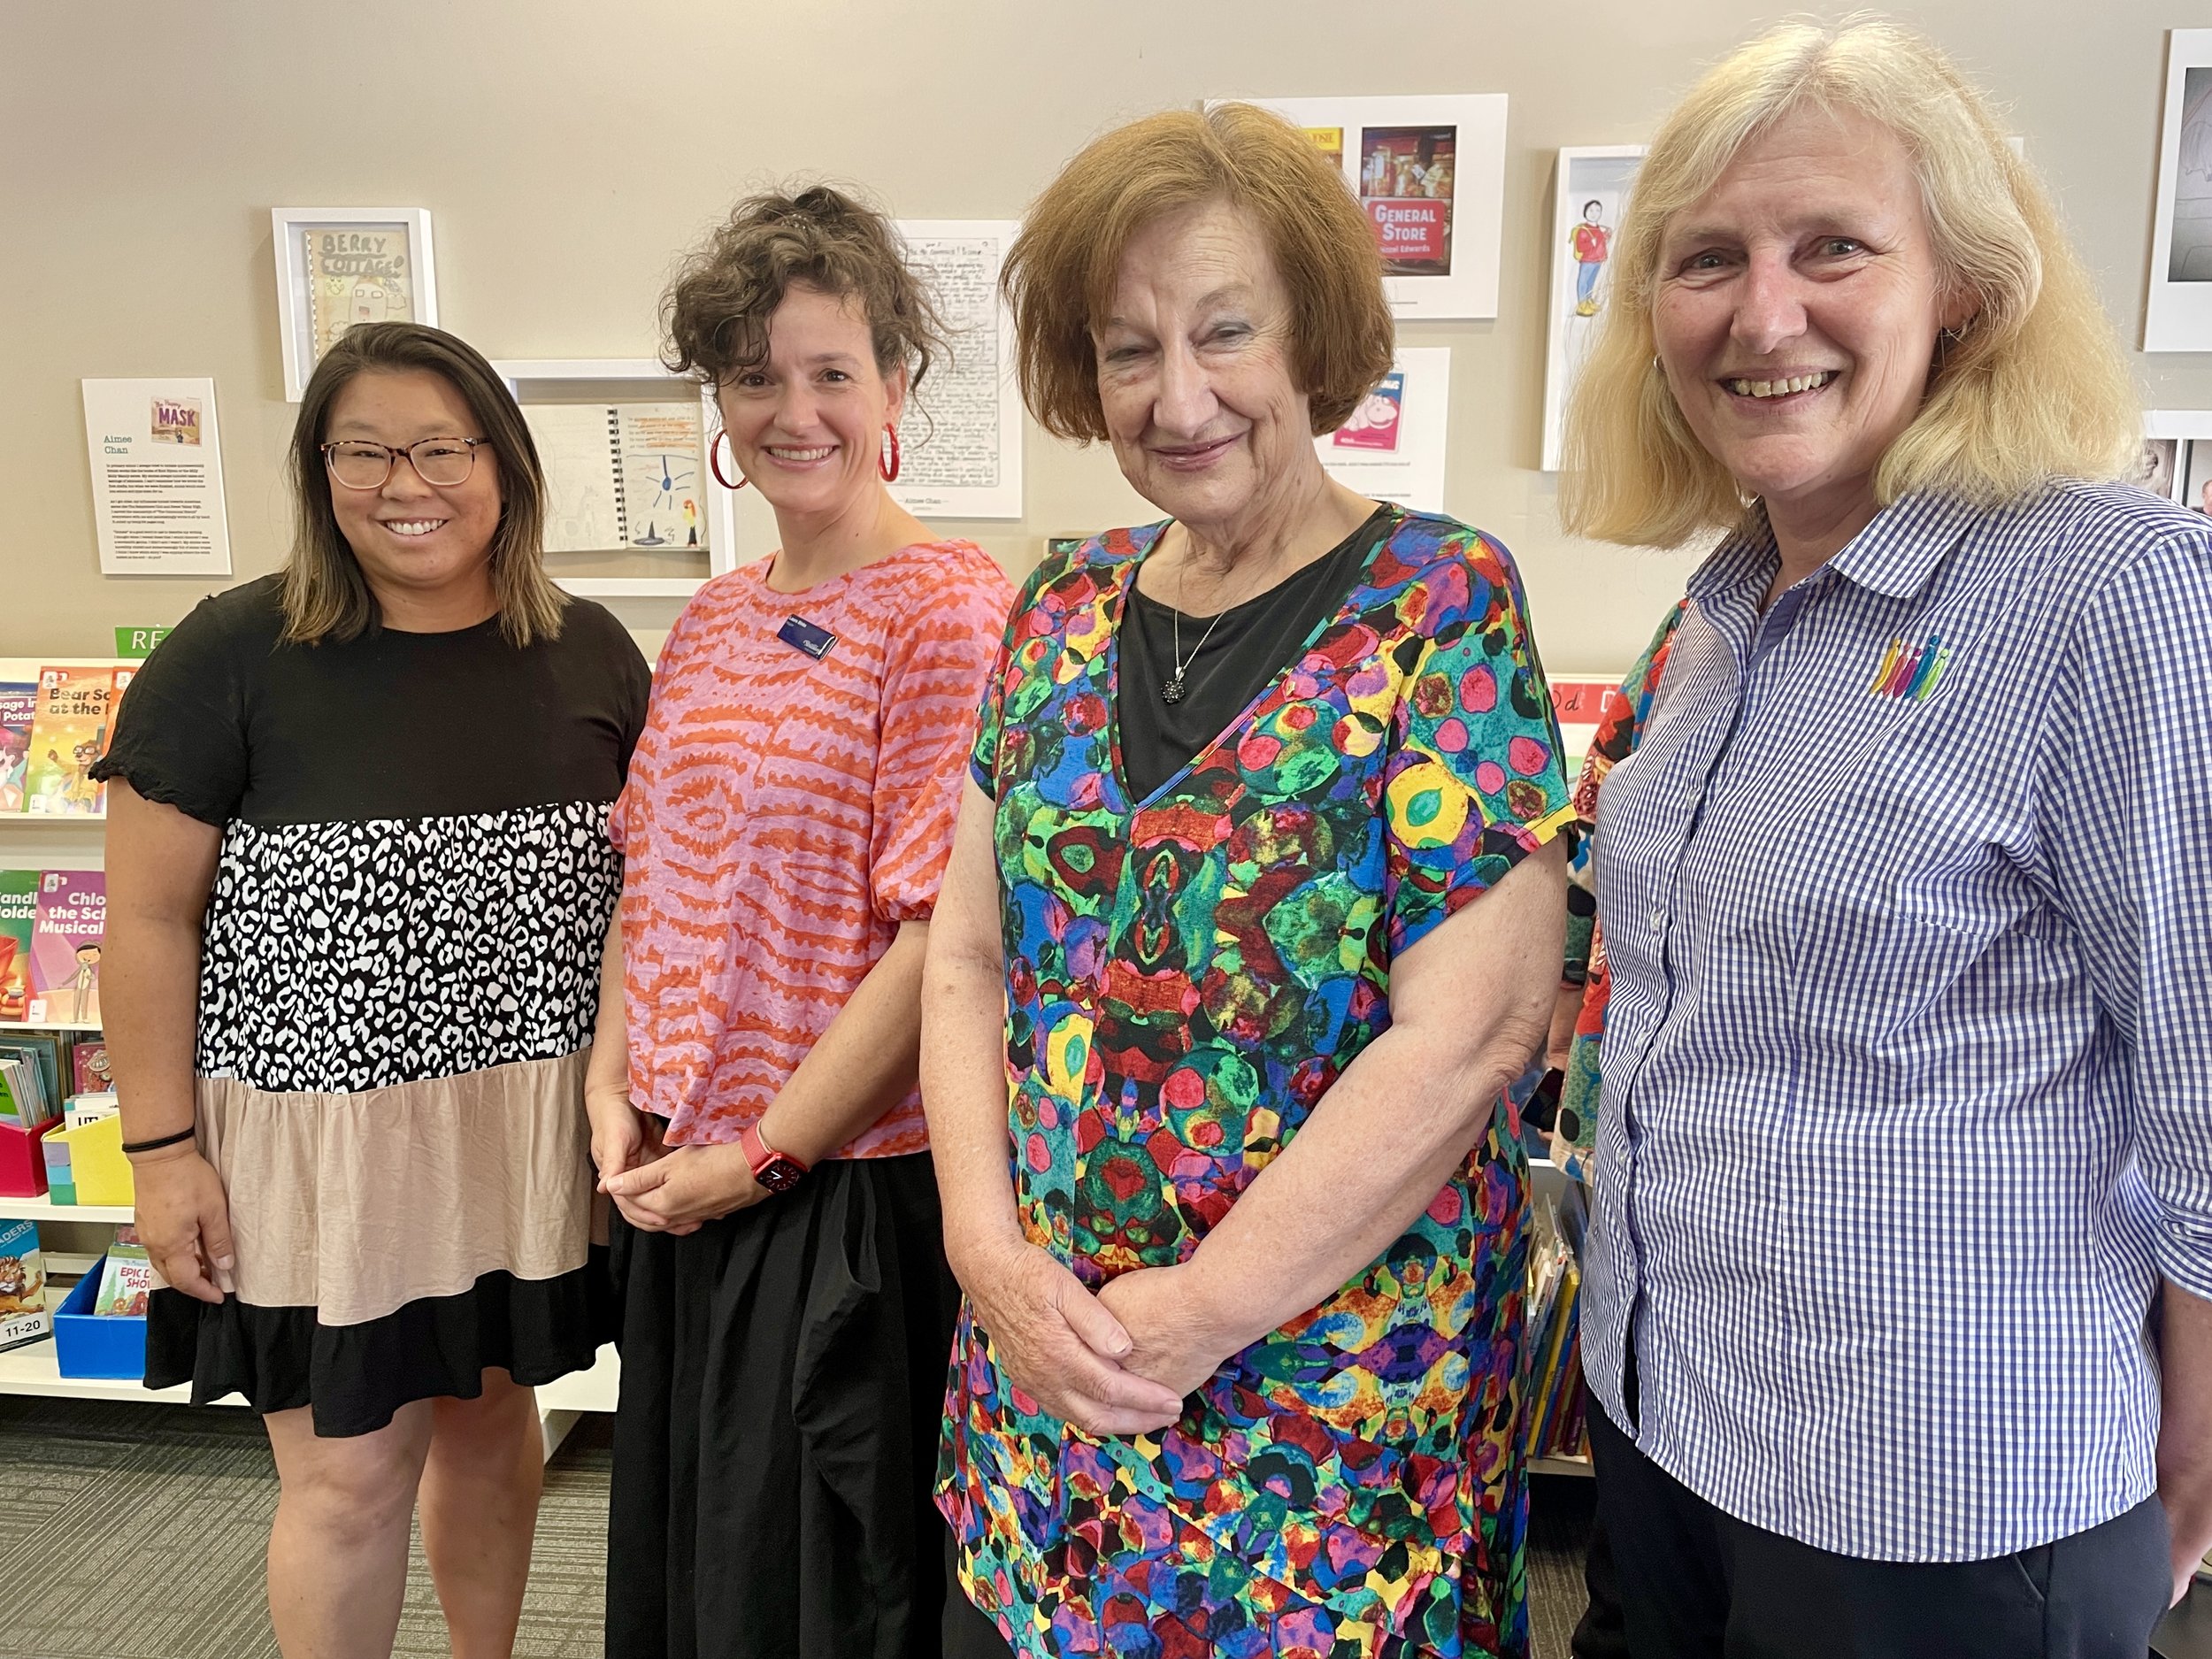  Aimee Chan at the launch of Juvenilia at Euroa Library with author Hazel Edwards OAM, Mayor Cr Laura Binks and library staff in February 2023 